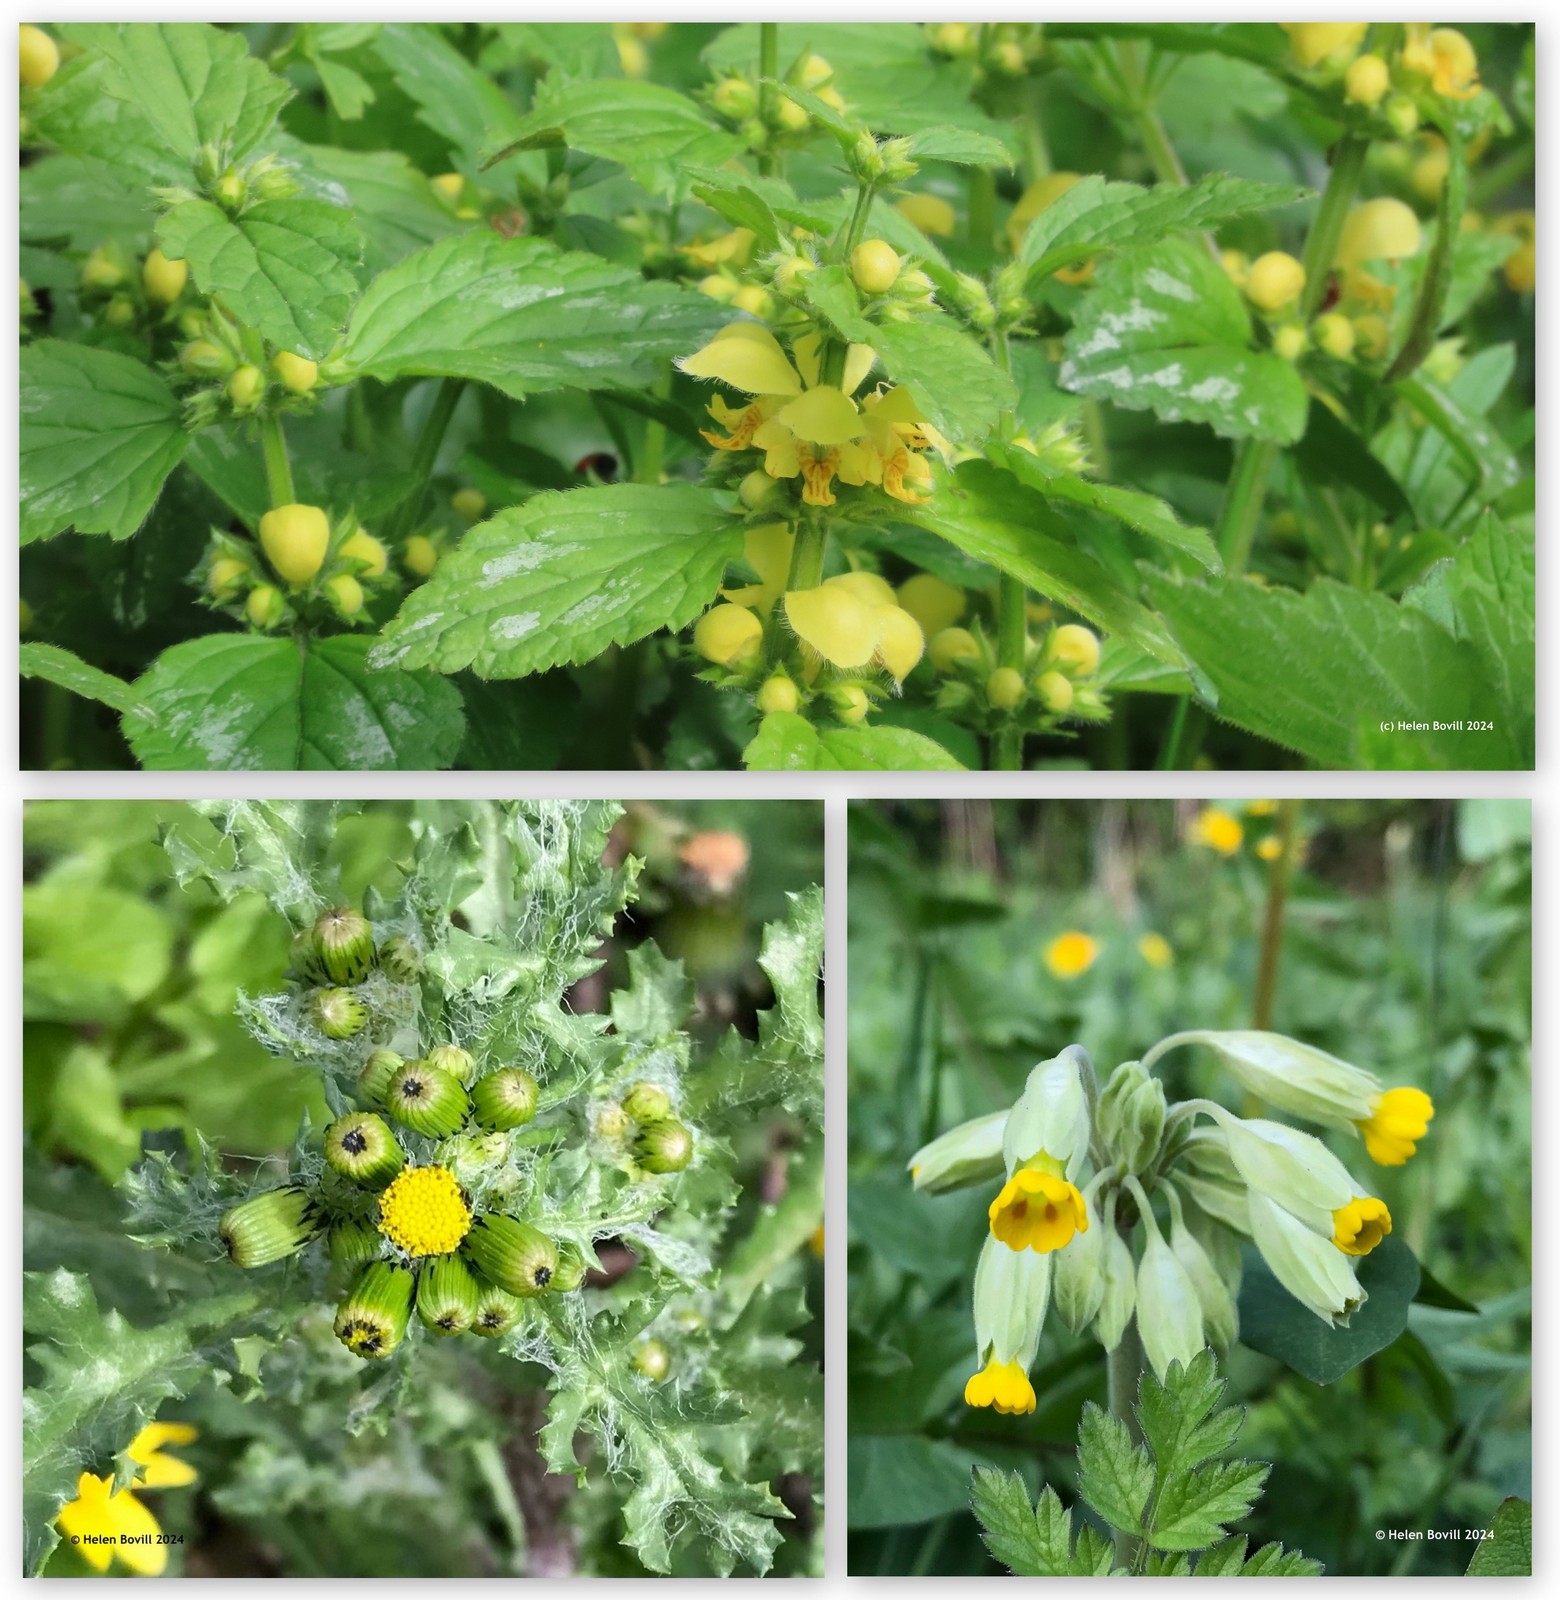 Three photos of yellow flowers - Yellow Archangel, Groundsel and Cowslip